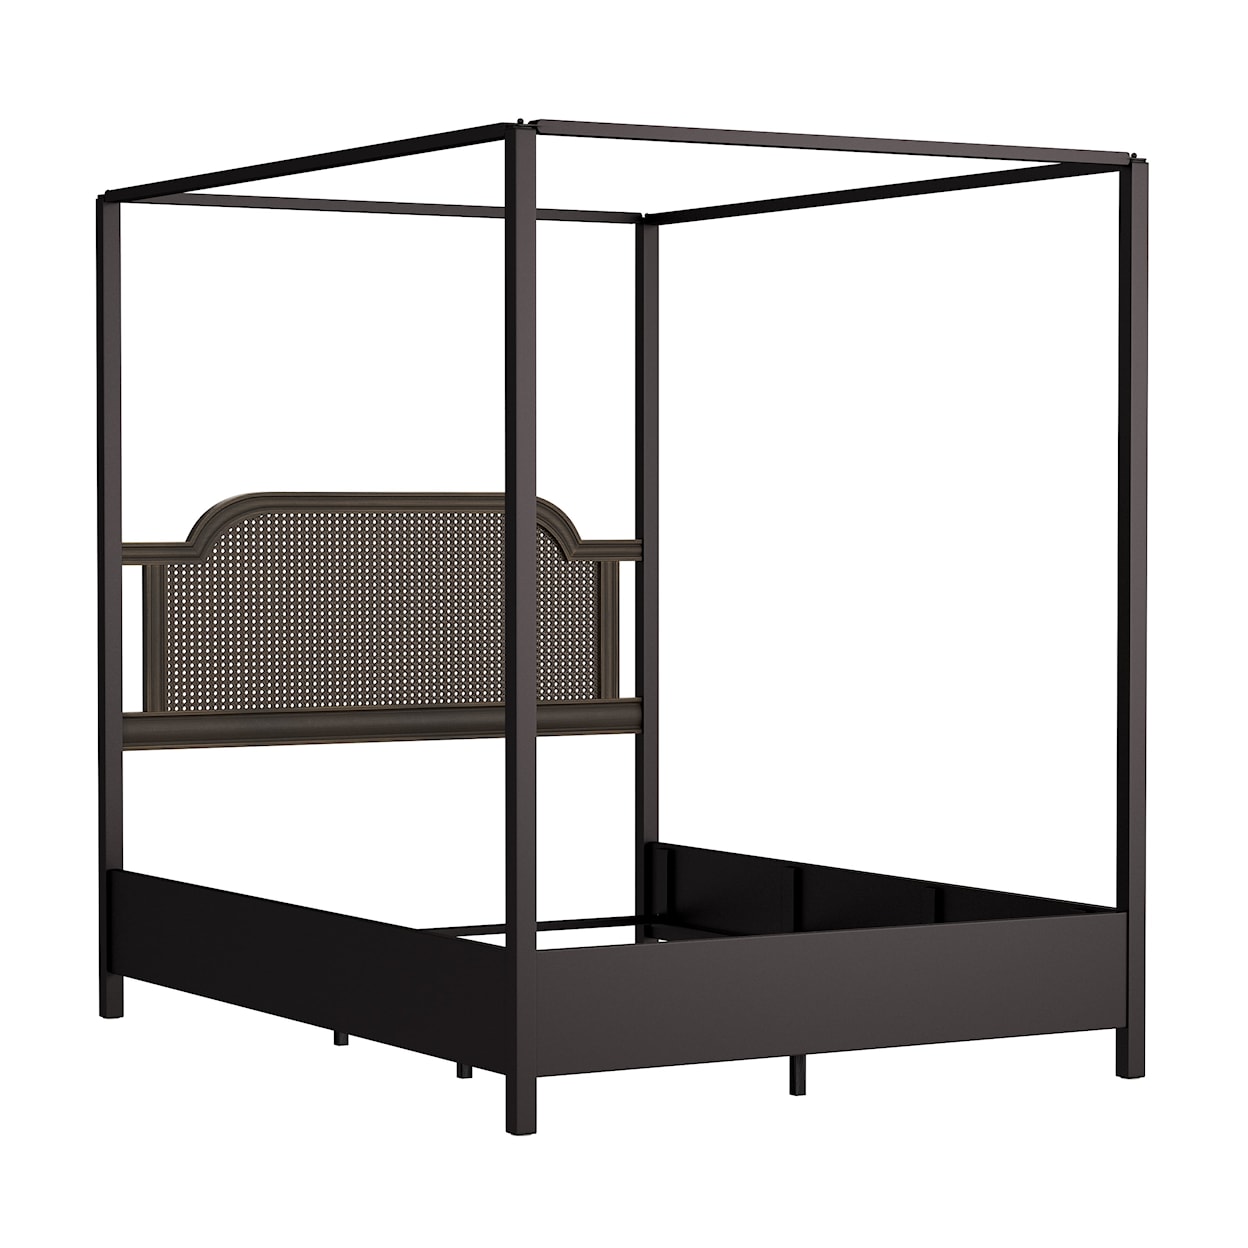 Hillsdale Melanie Queen Size Canopy Bed with Low Footboard